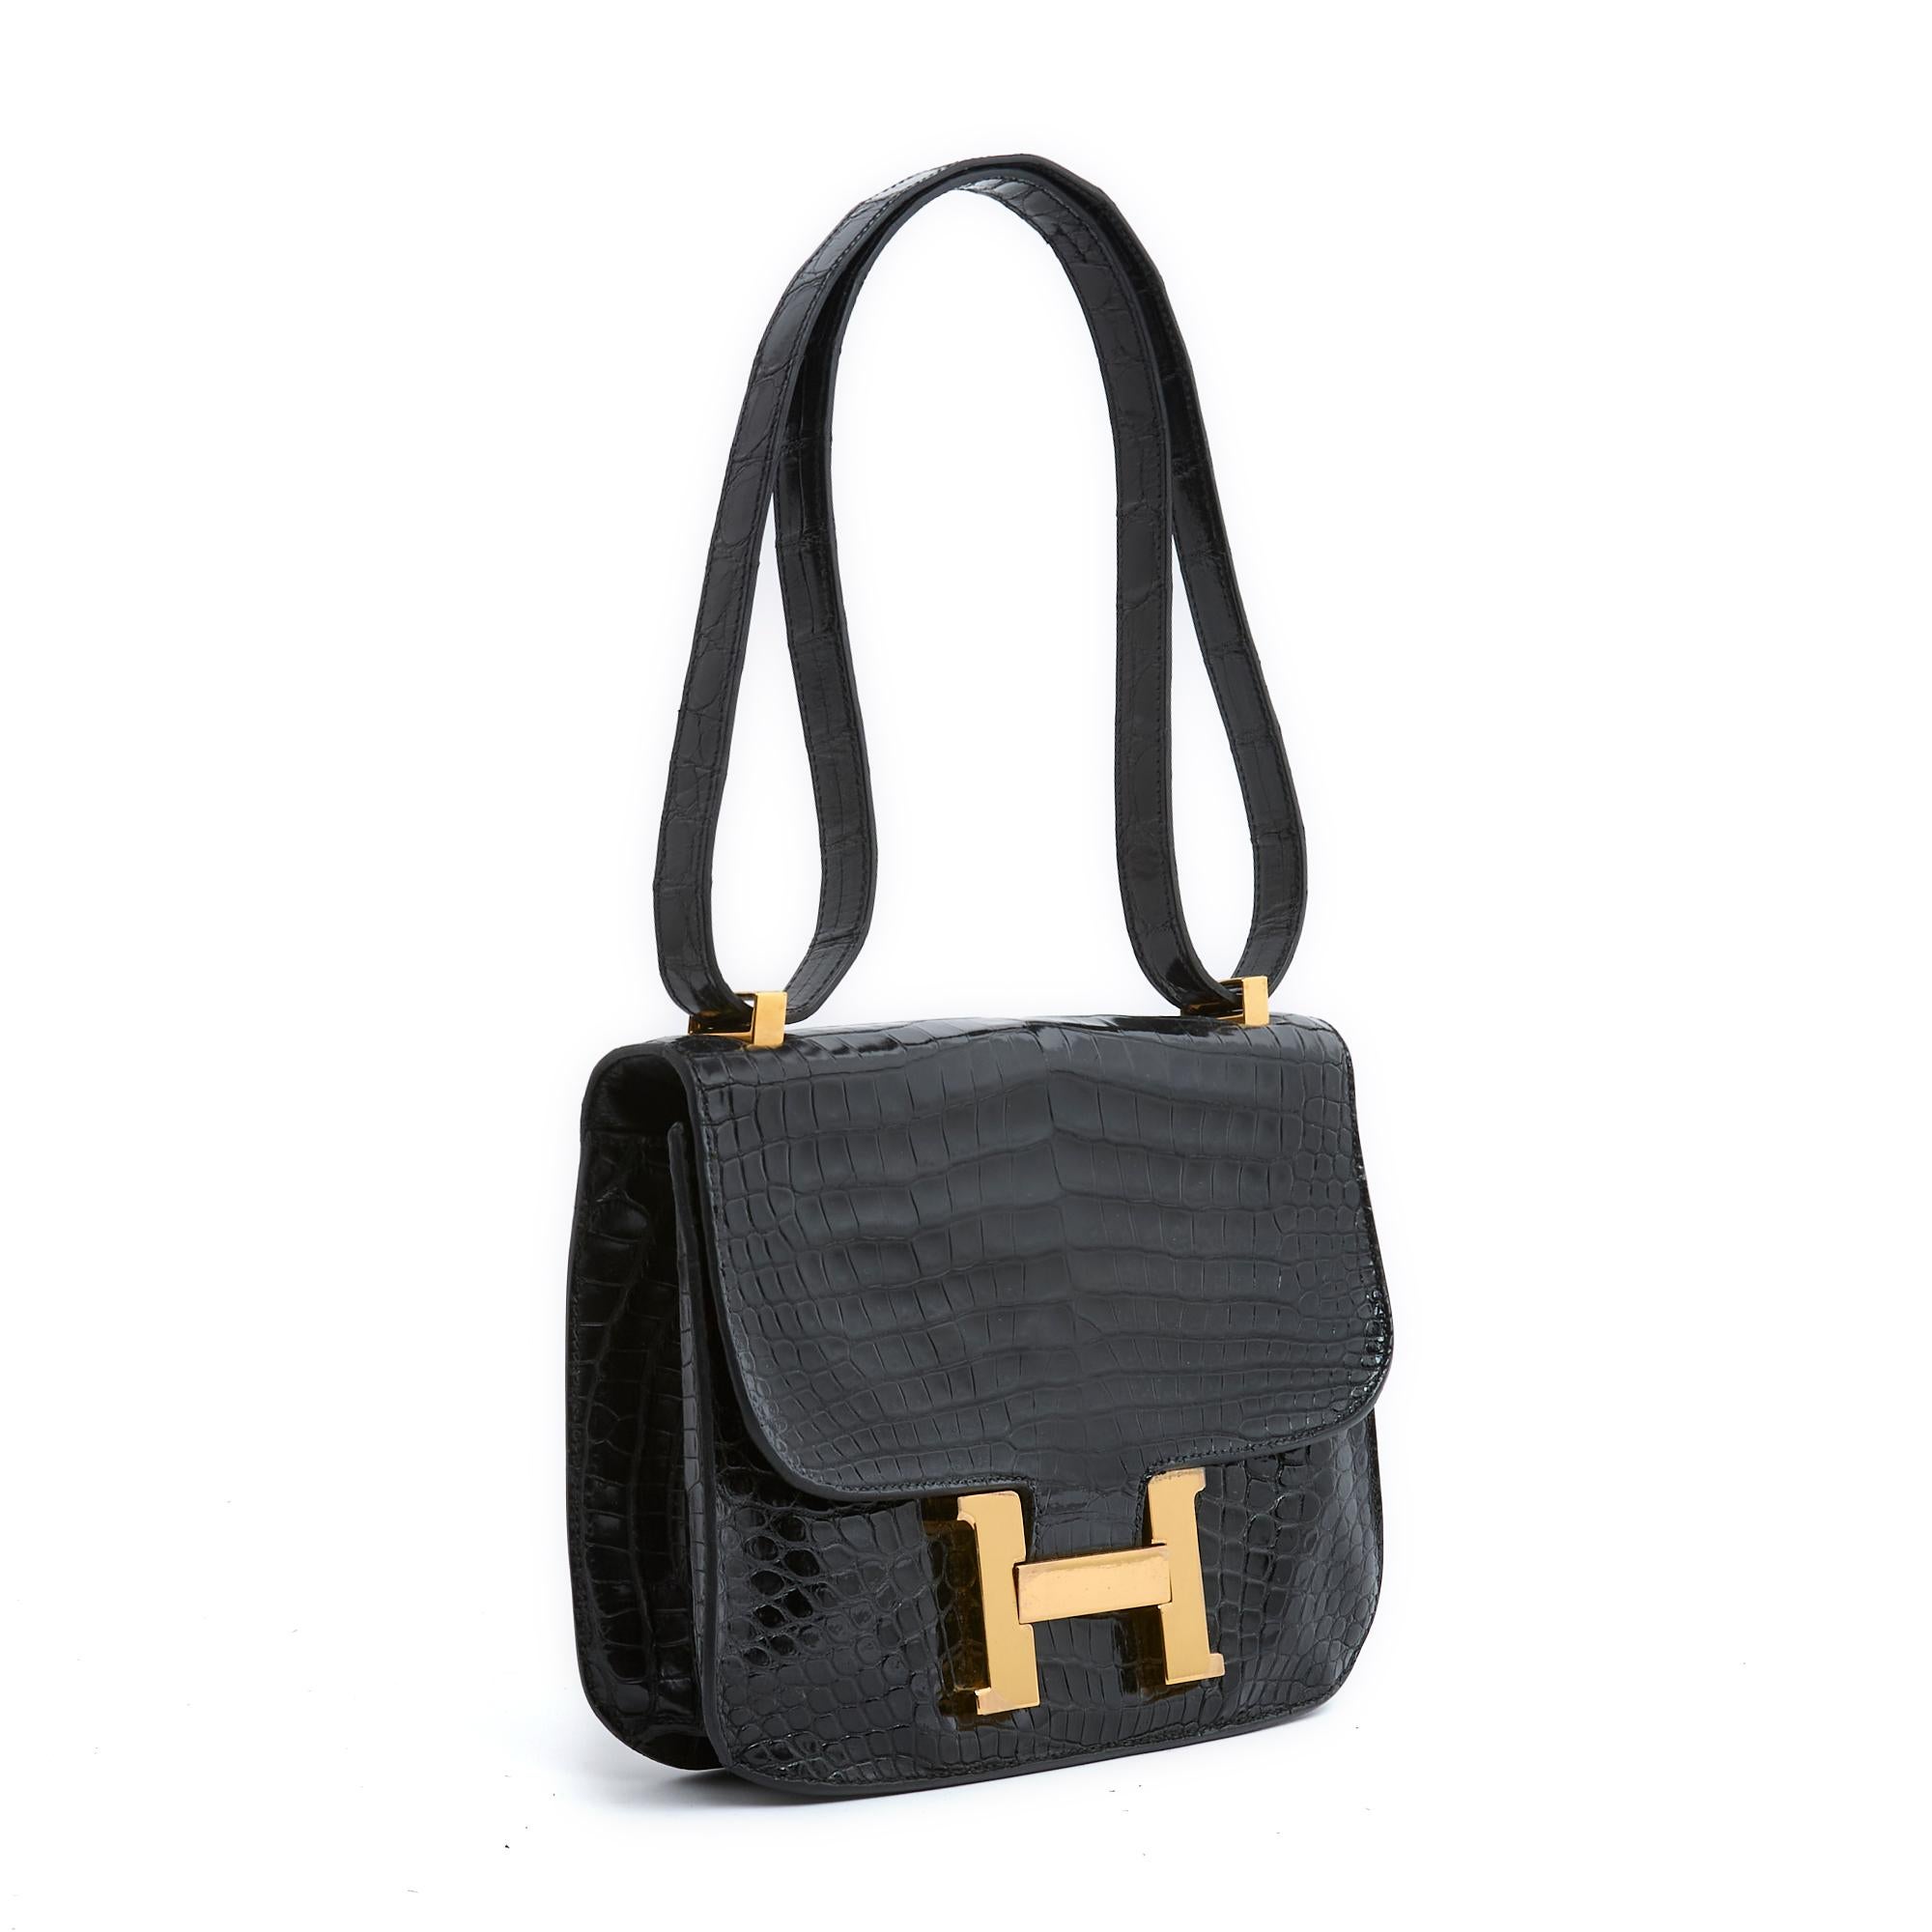 Hermès Constance model bag in black exotic leather (Porosus), interior in soft black leather with one patch pocket and one zipped pocket, clasp with the famous H motif in gold metal (brass), shoulder strap for single (shoulder) or double carry